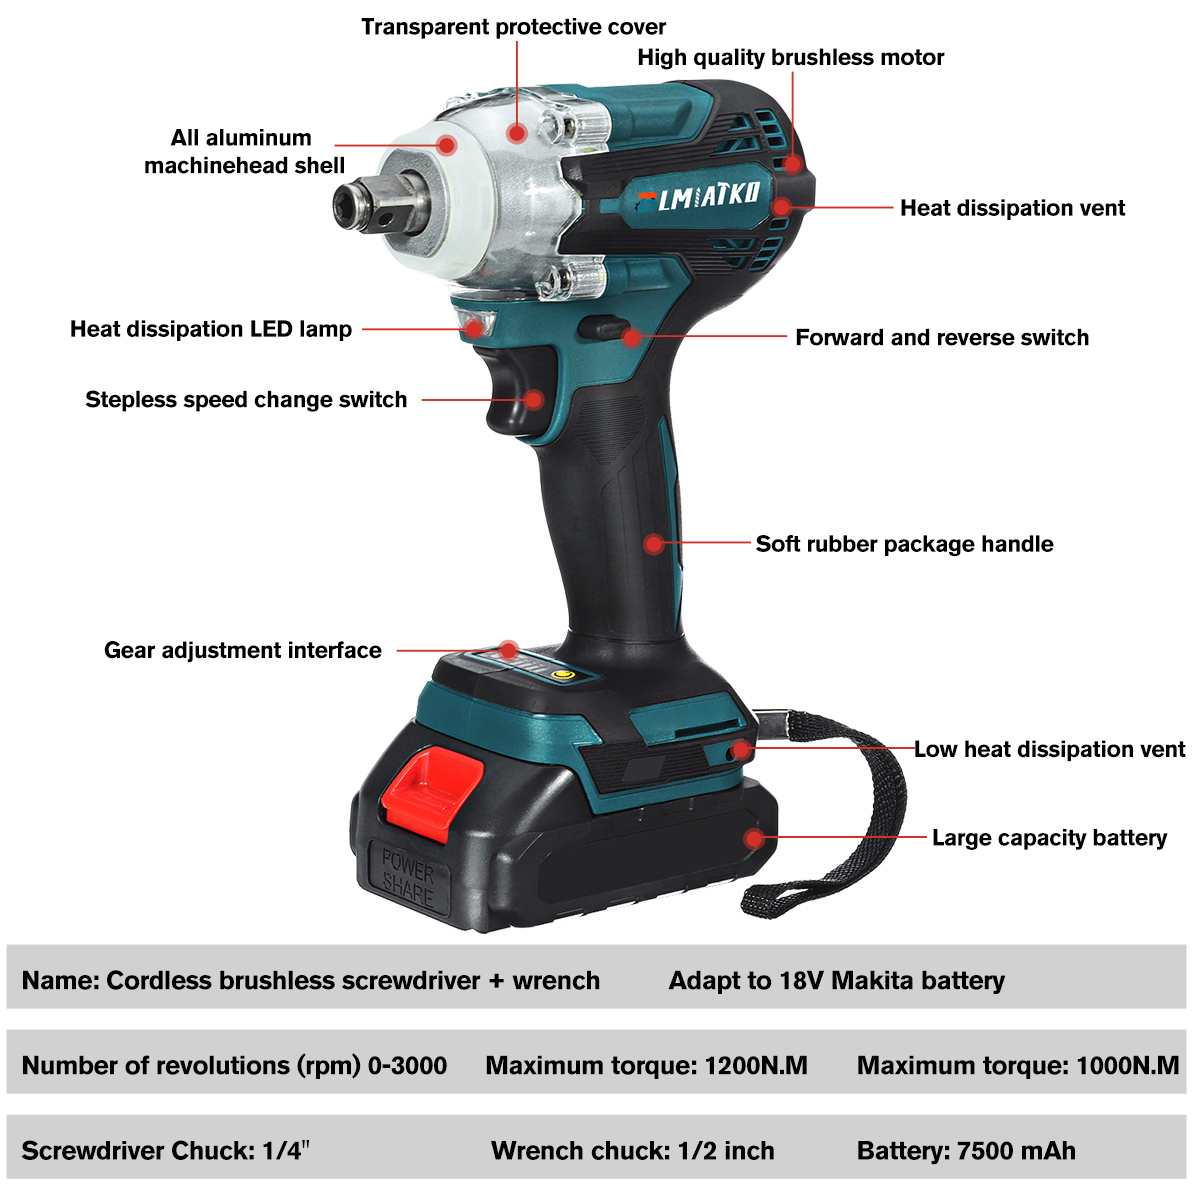 4-Speed-Brushless-Cordless-Electric-Impact-Wrench-with-Battery-1200NM-Rechargeable-12inch-Torque-Wre-1843508-10